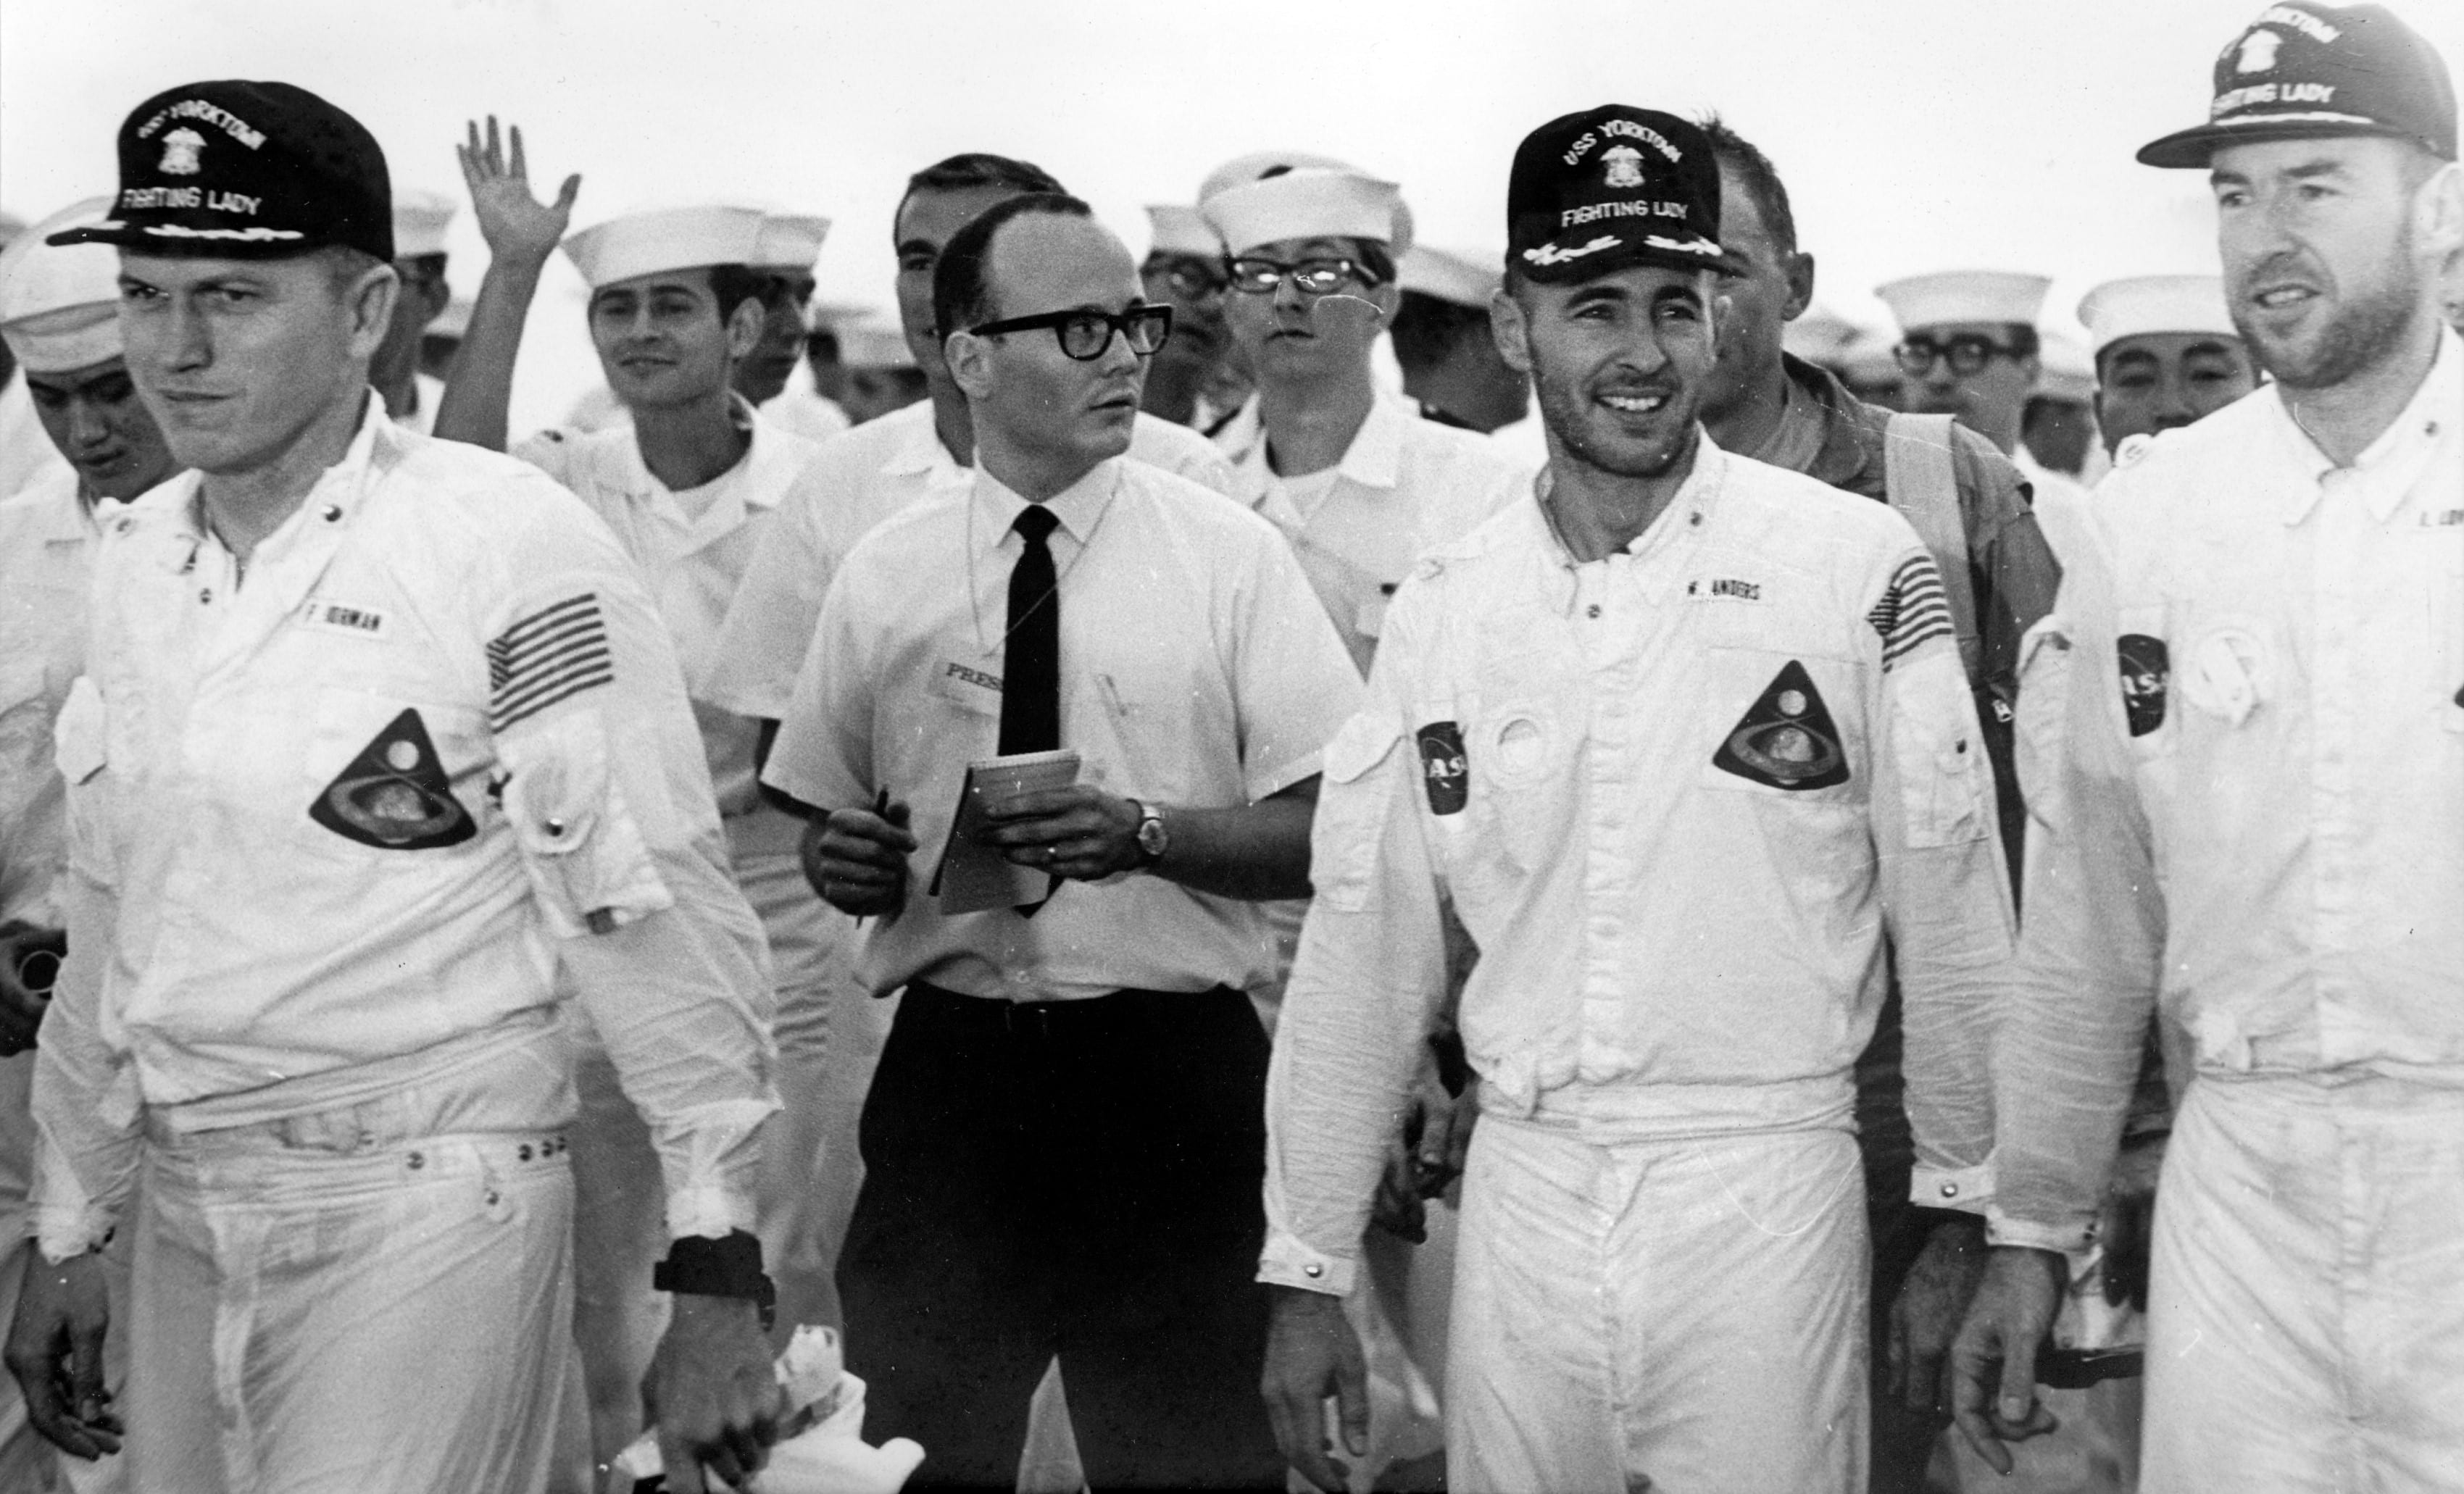 Left to right: Borman, Holcomb, Anders, and Lovell on the deck of the USS Yorktown. Image Credit: AP Photo/Bob Schultz.